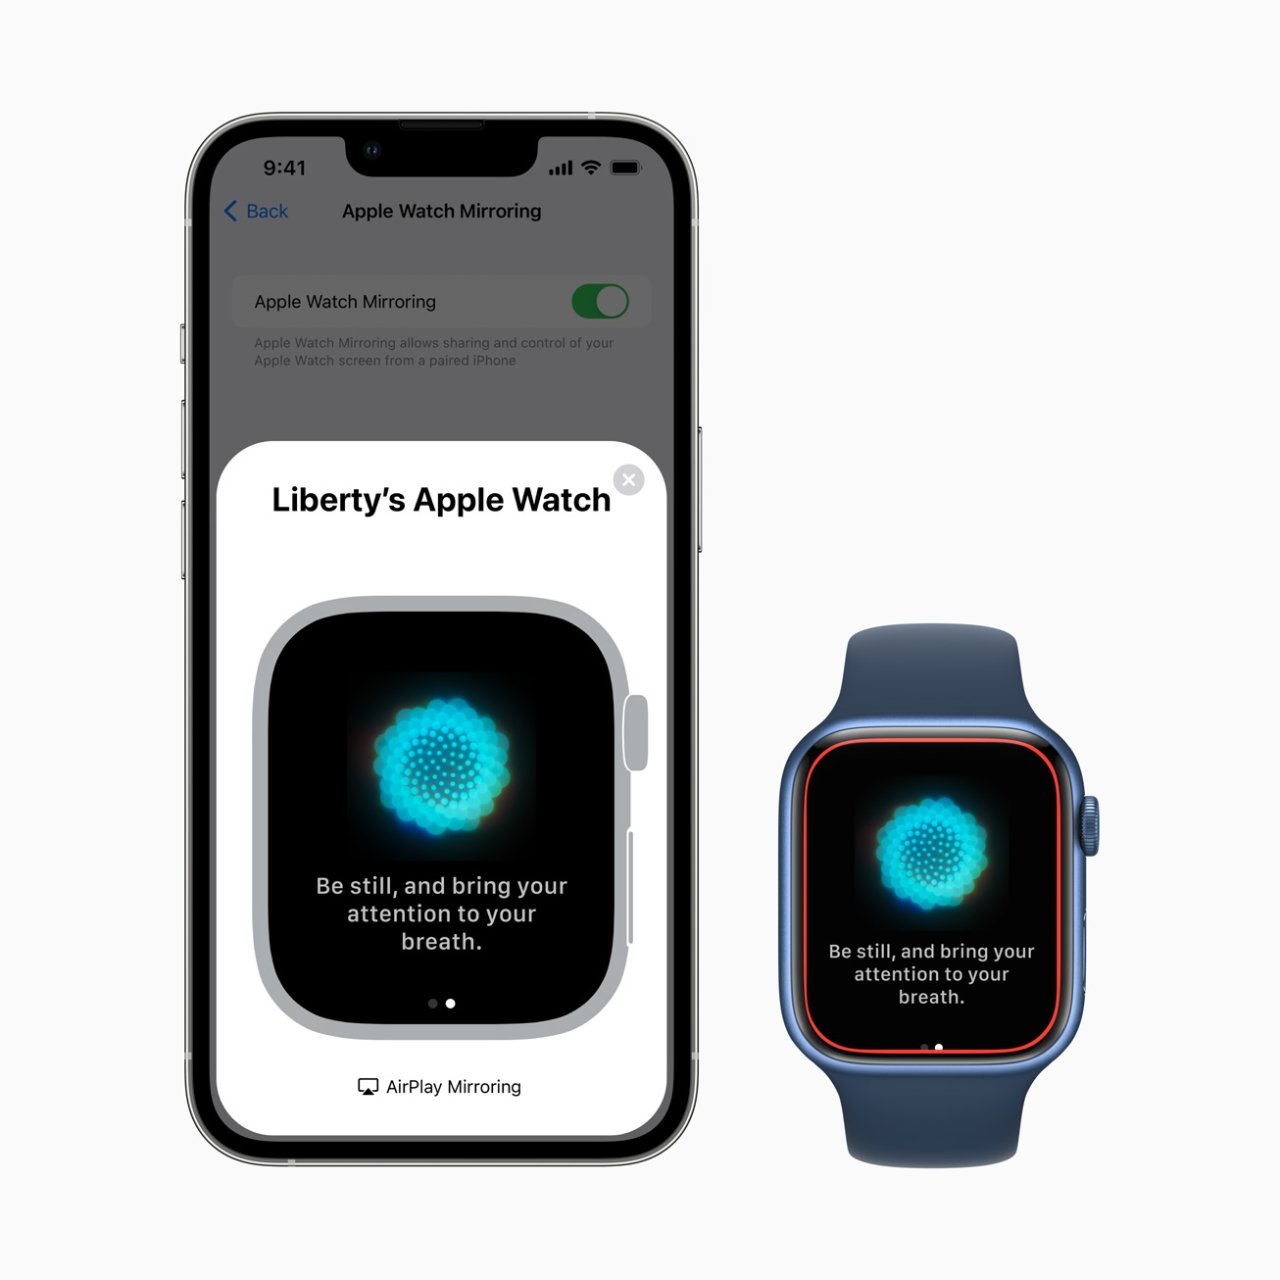 New Apple Watch Mirroring will let users control their Watch via their iPhone